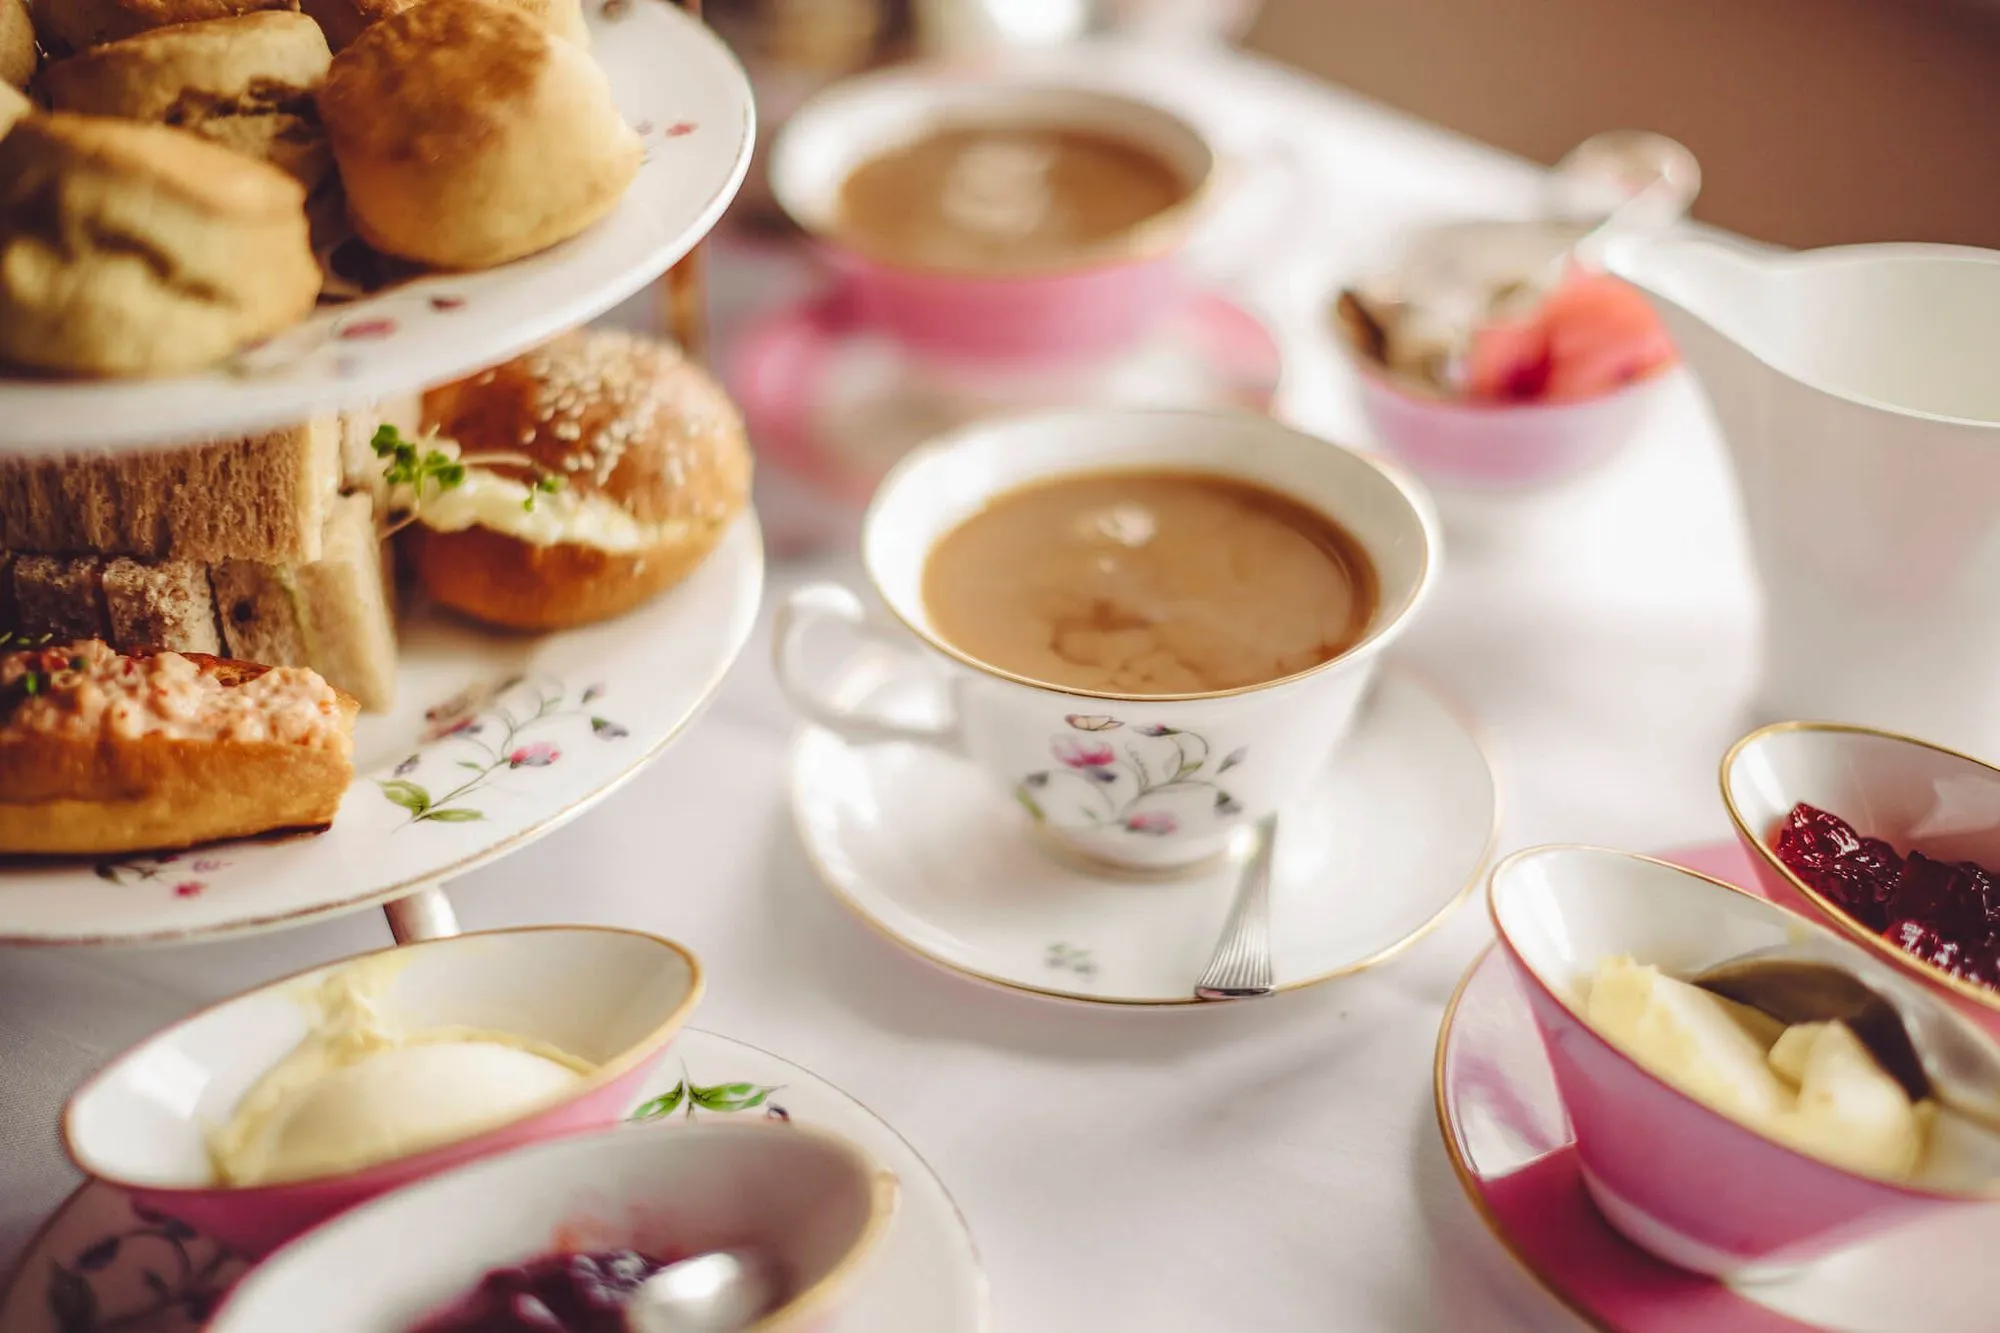 Afternoon tea laid out on a table.